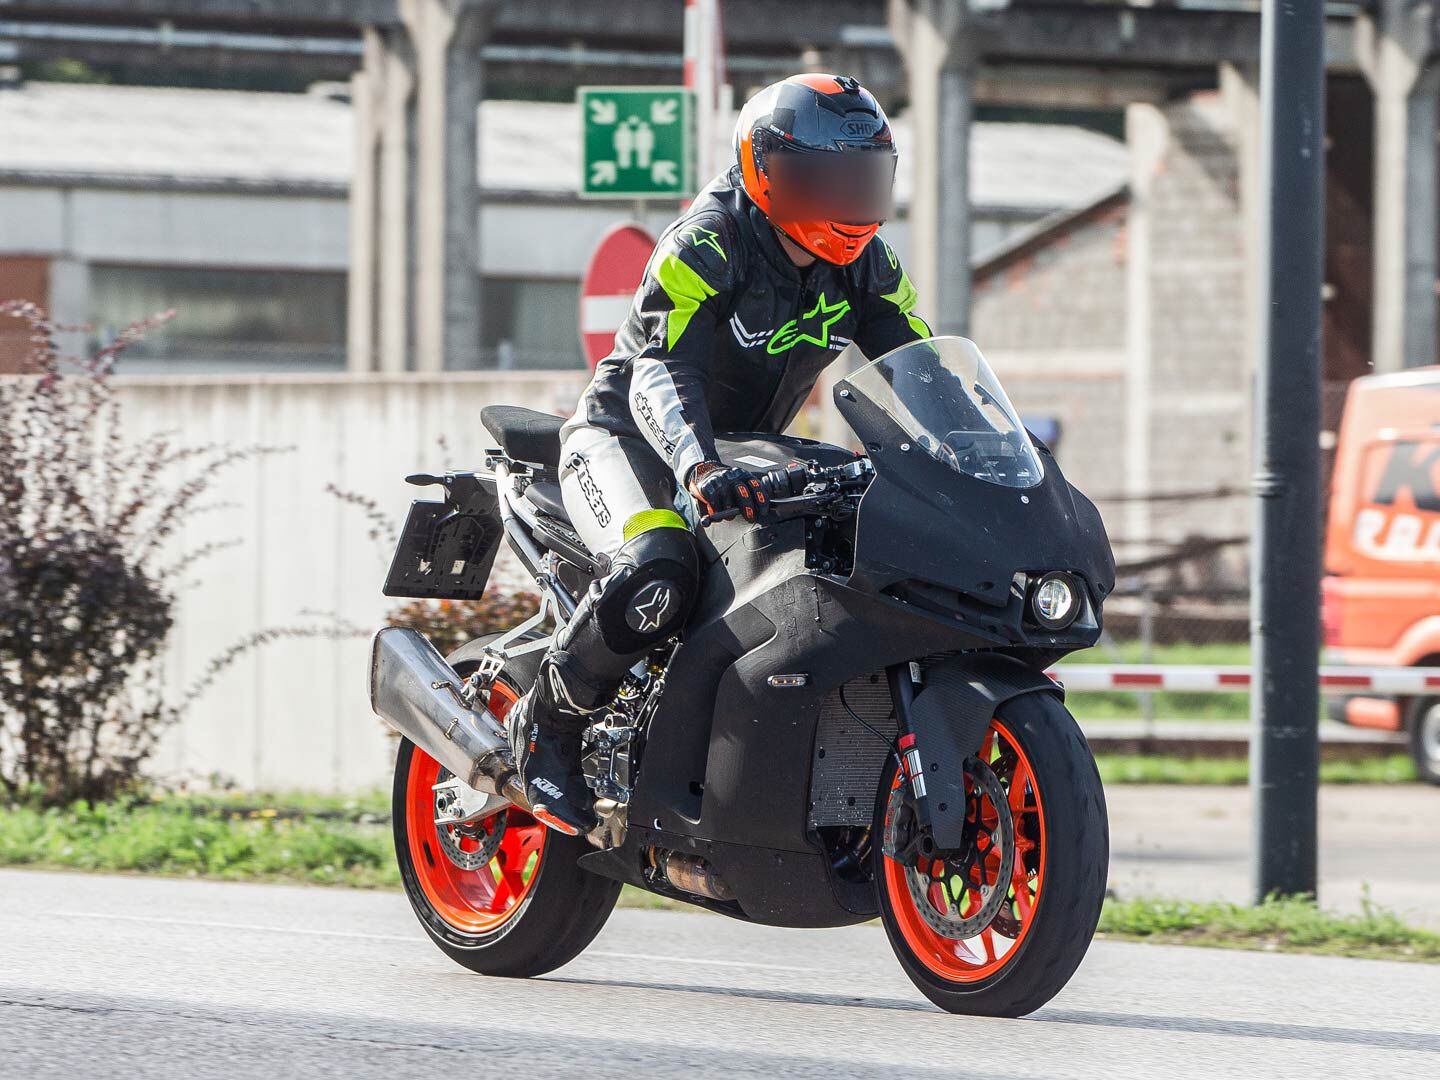 KTM continues development of the bike that we believe will be called the RC 990.